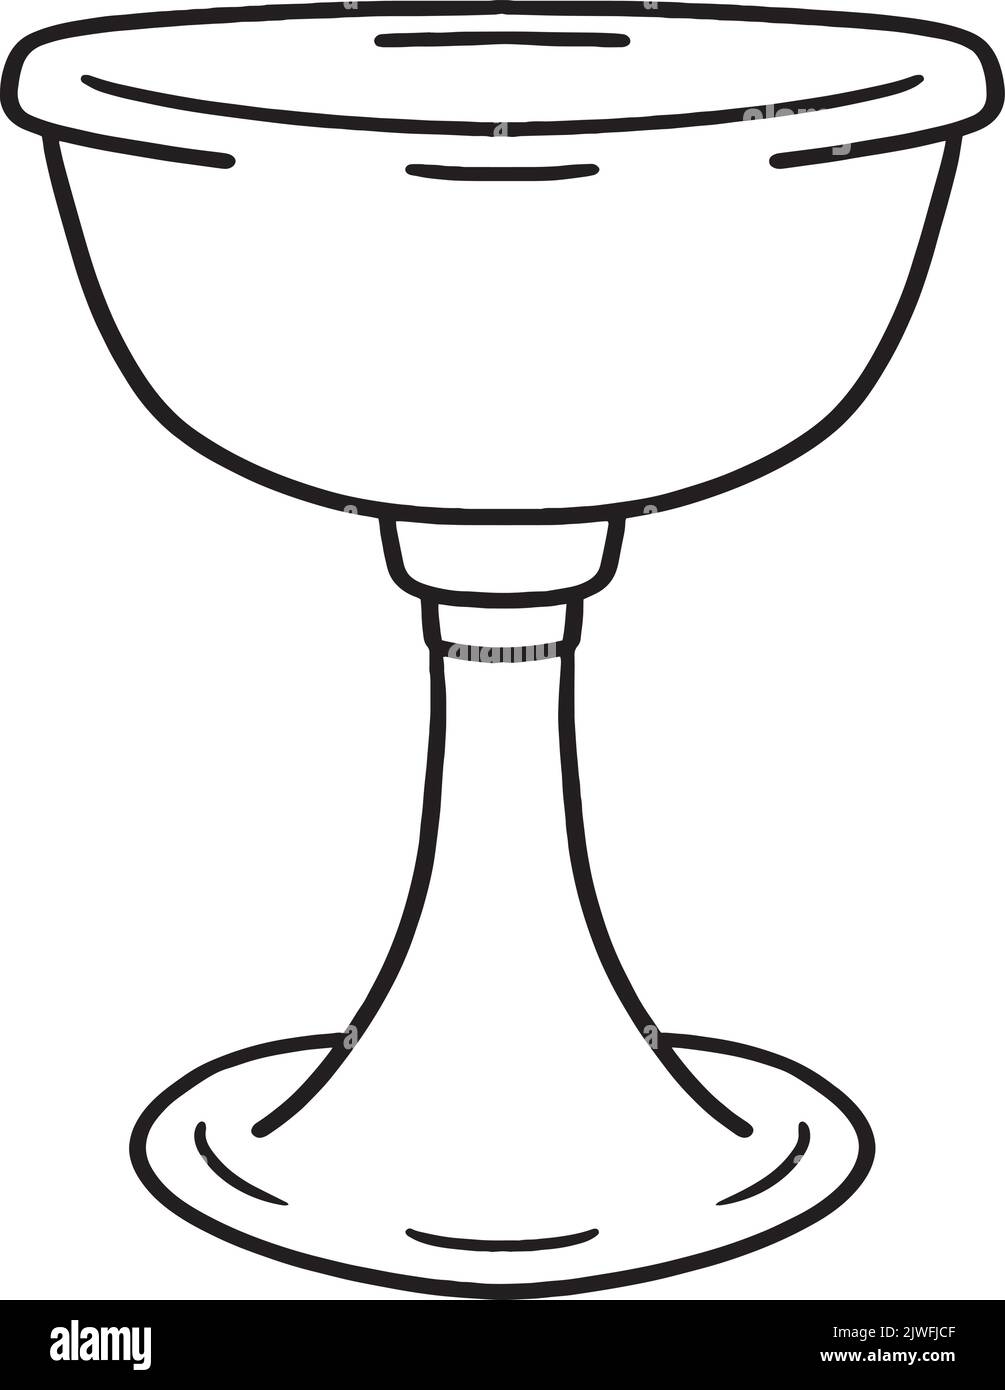 Hanukkah Chalice Isolated Coloring Page for Kids Stock Vector